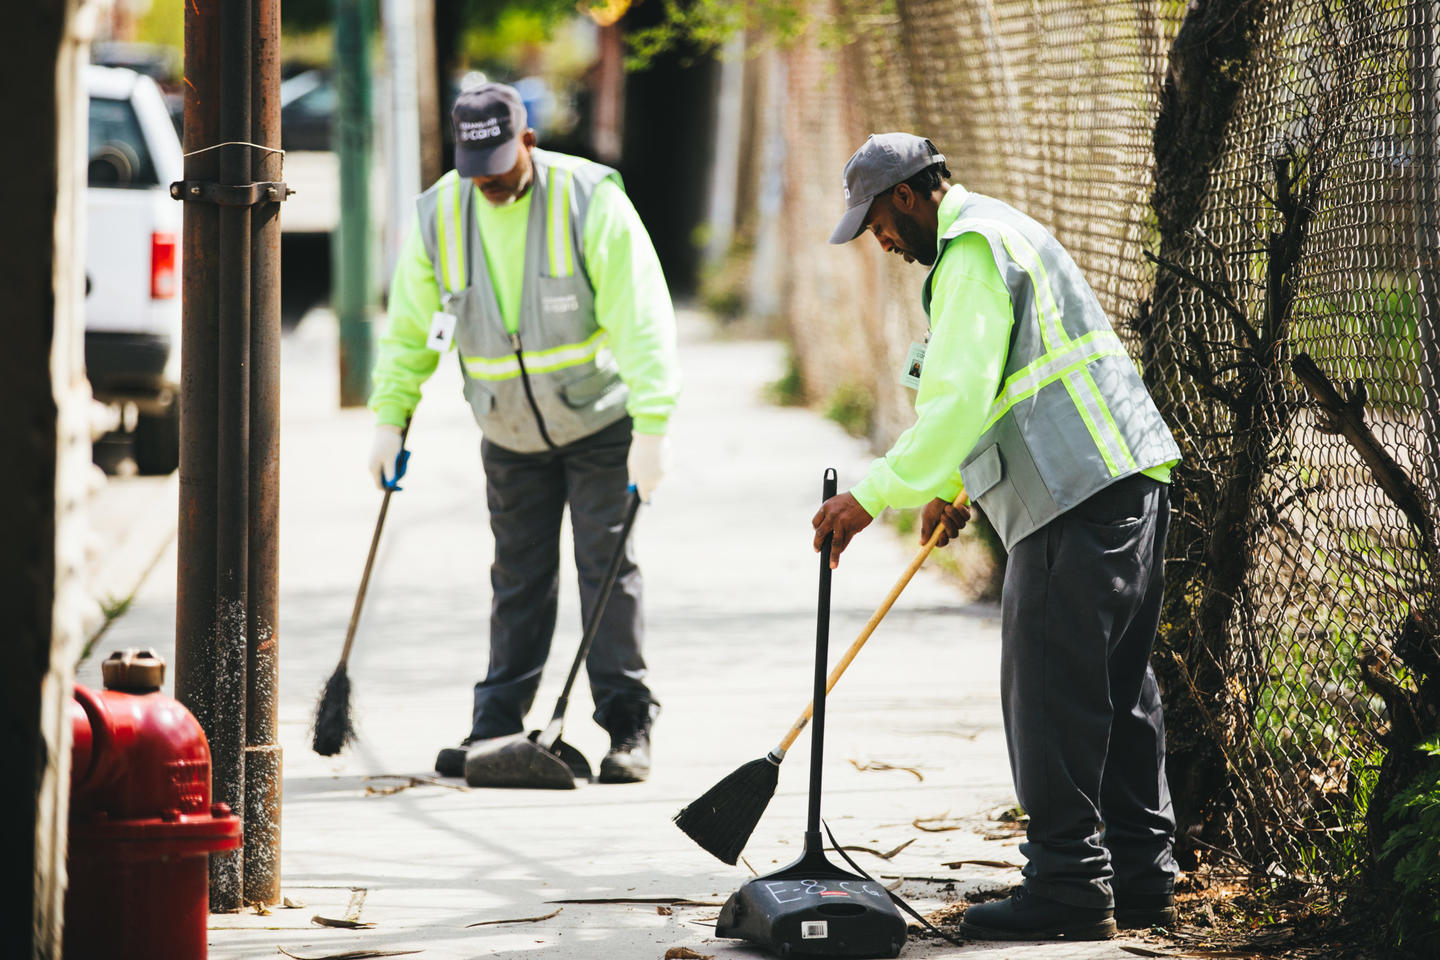 Two people cleaning up the street with brooms and dustpans